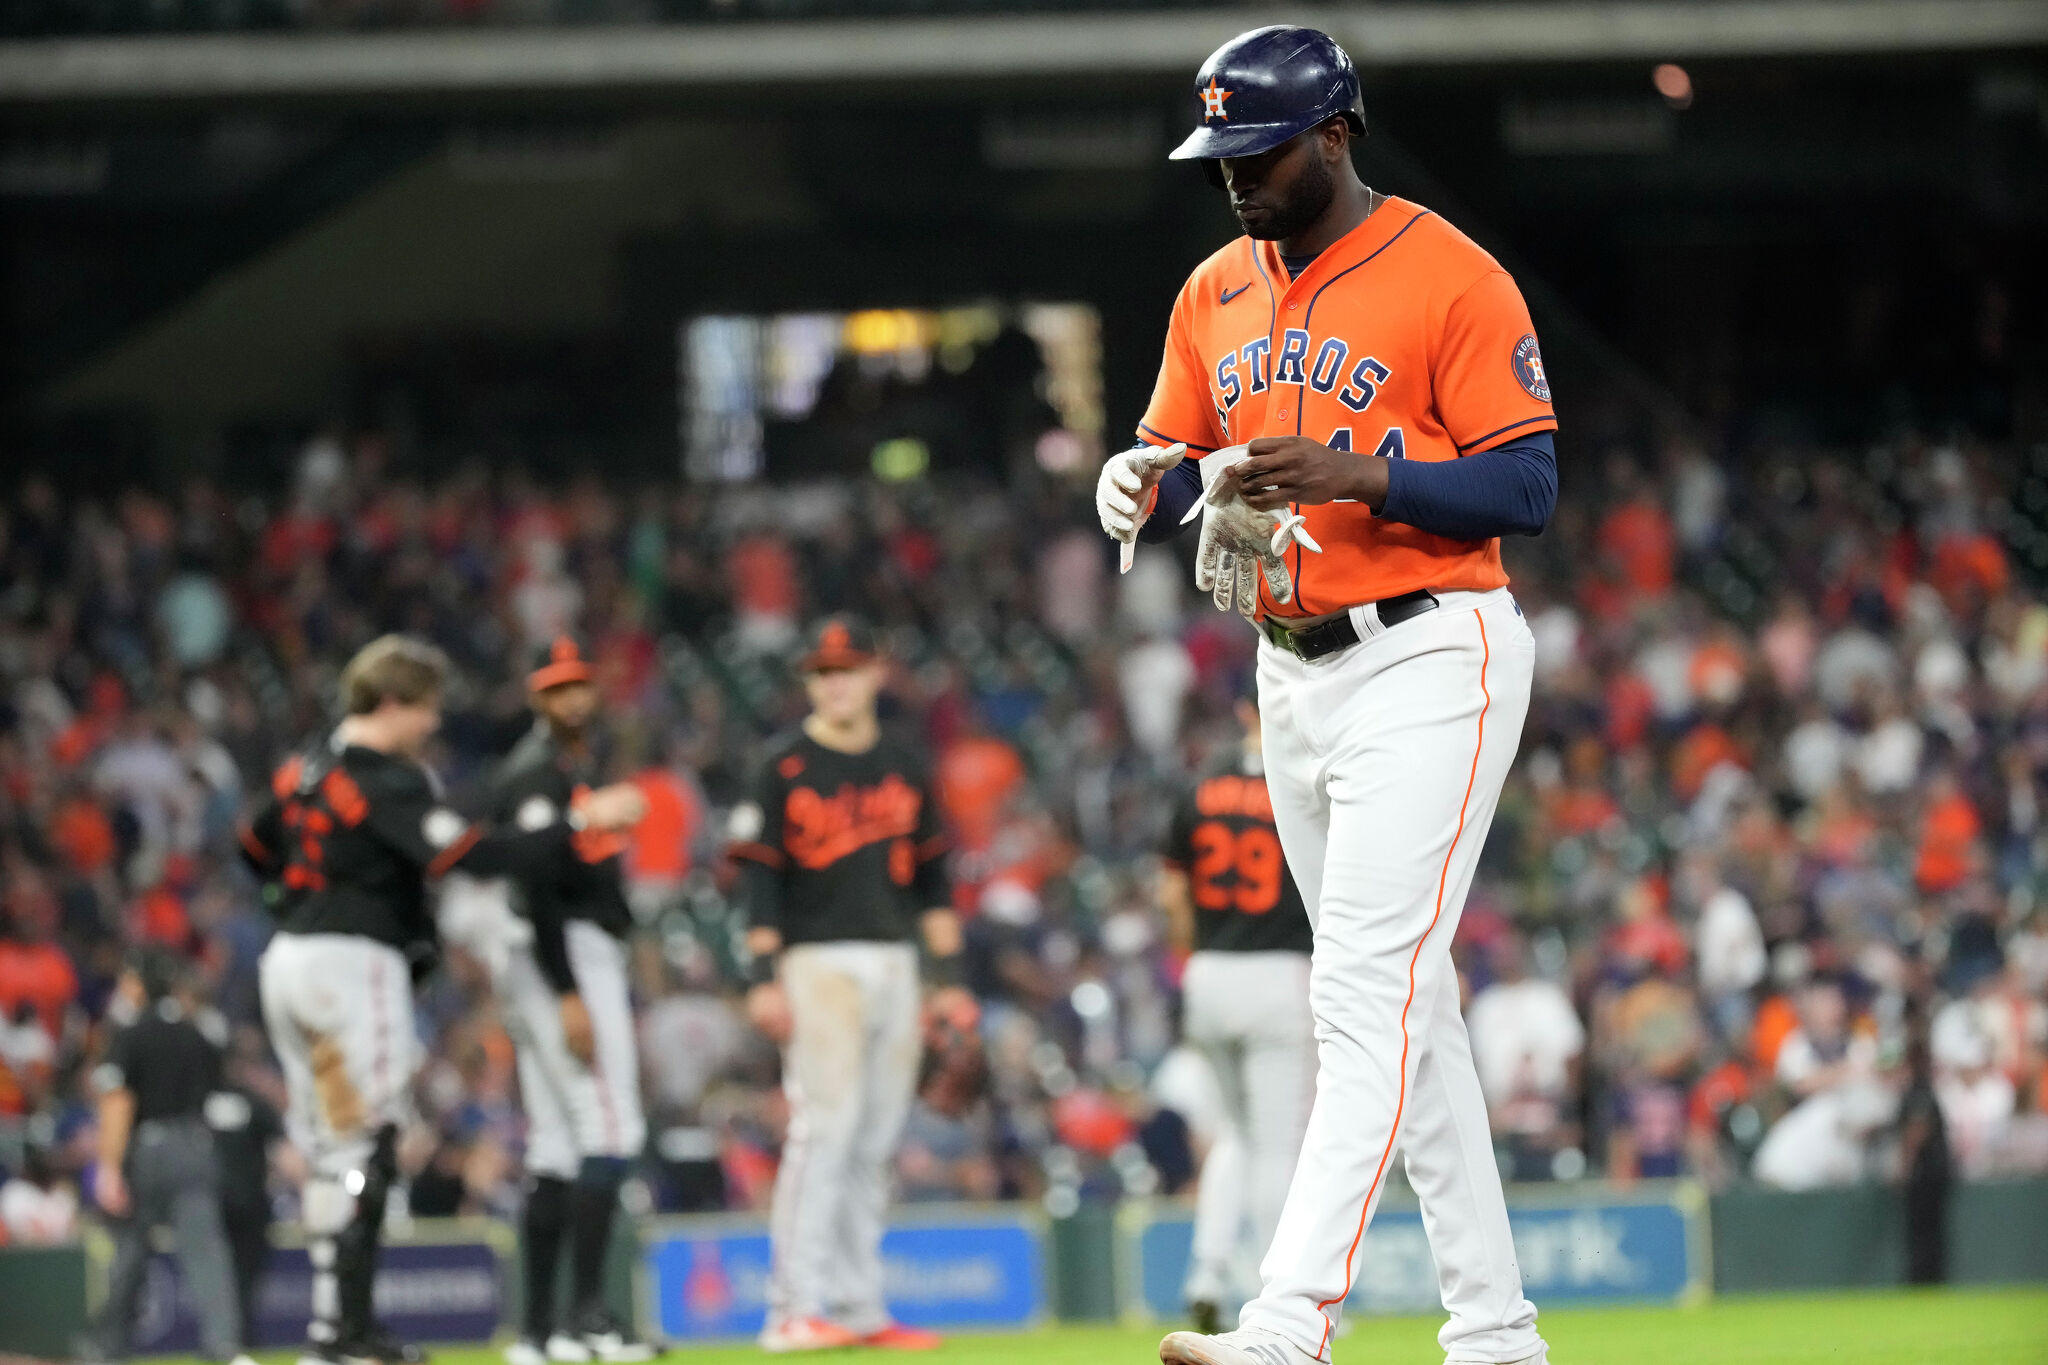 Astros All-Star outfielder Yordan Alvarez placed on IL with